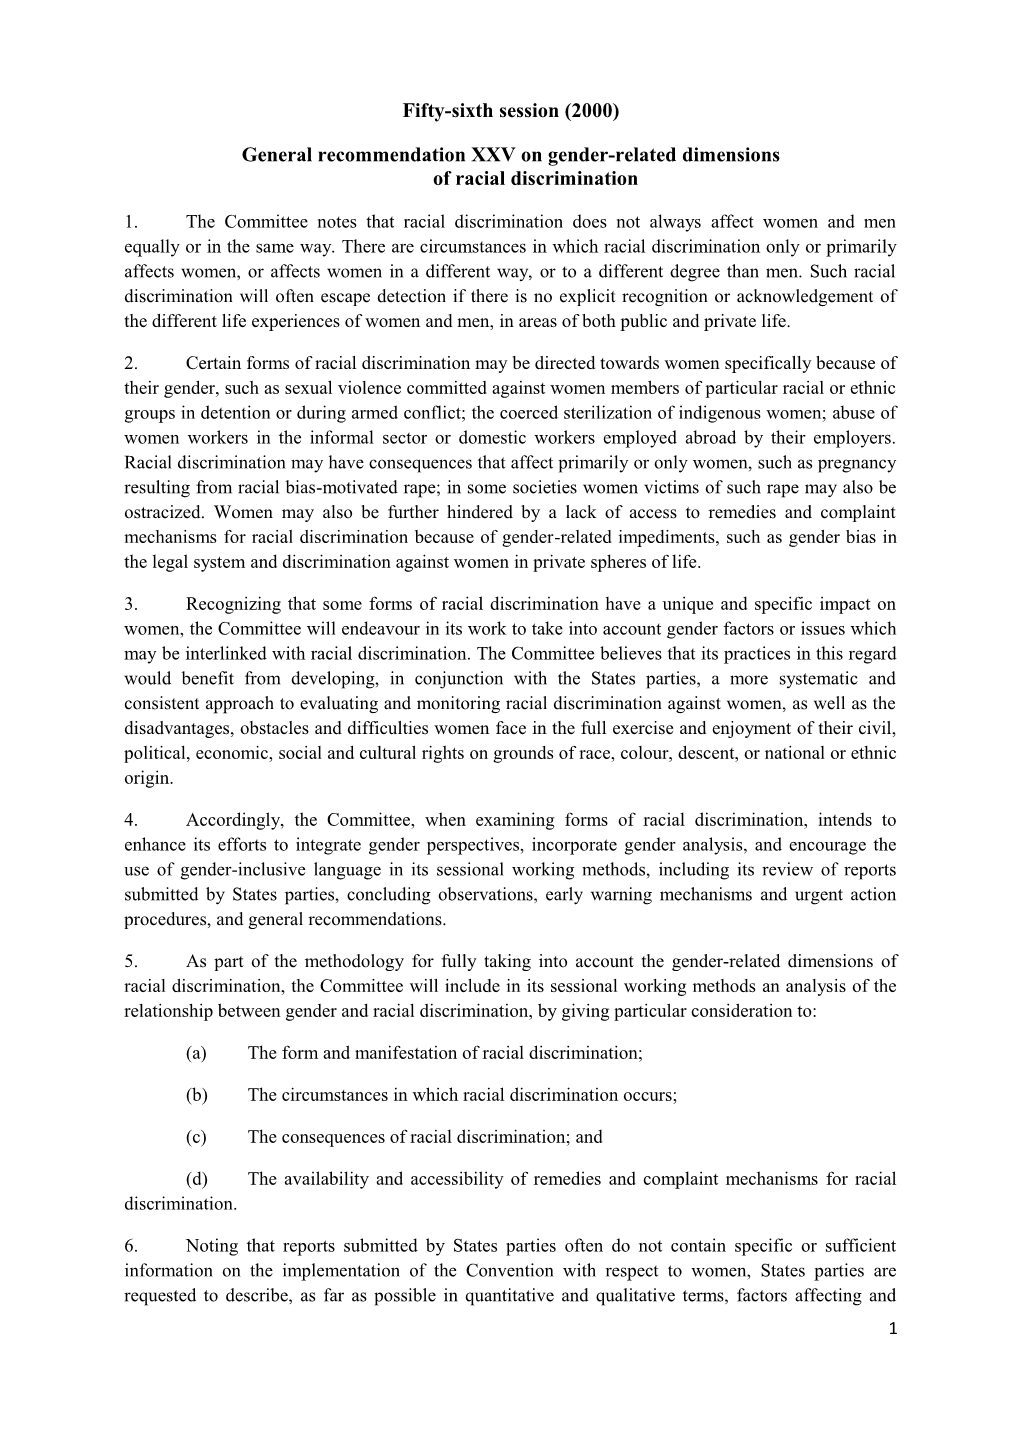 General Recommendation XXV on Gender-Related Dimensionsof Racial Discrimination